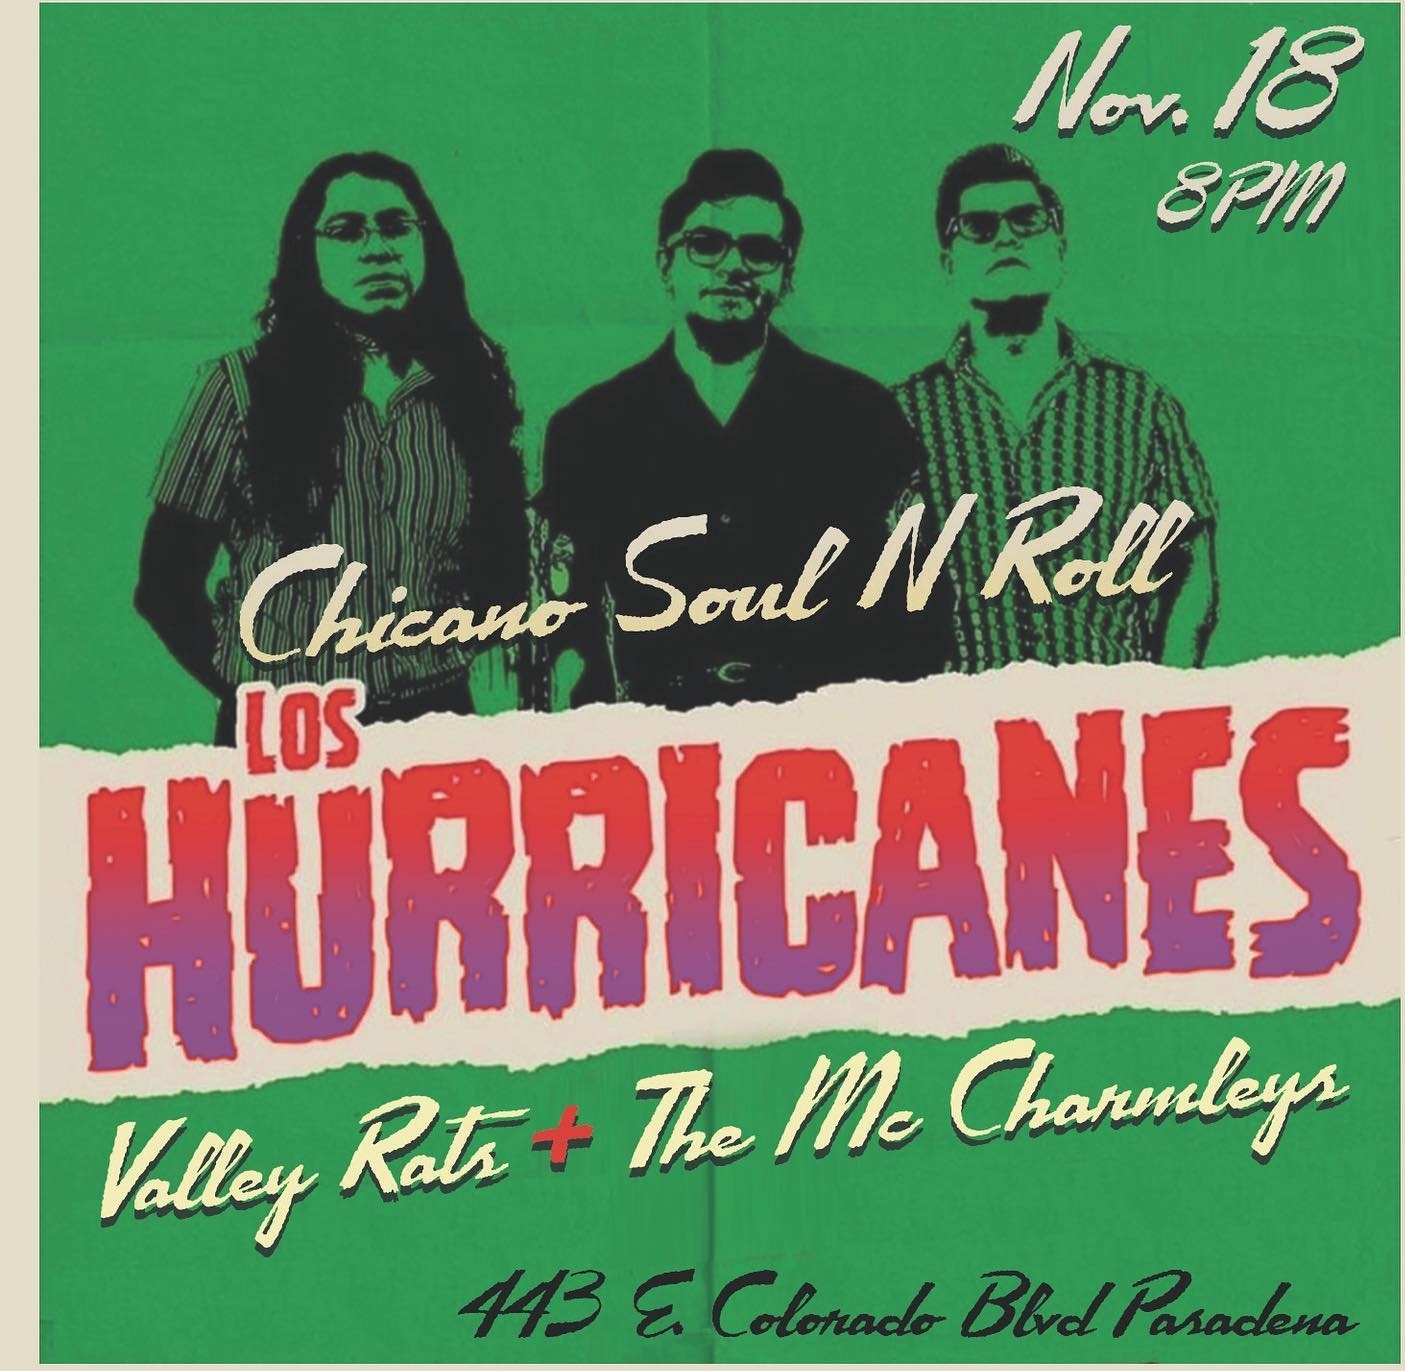 You are currently viewing A night of Latin Rock n Soul with Los Hurricans